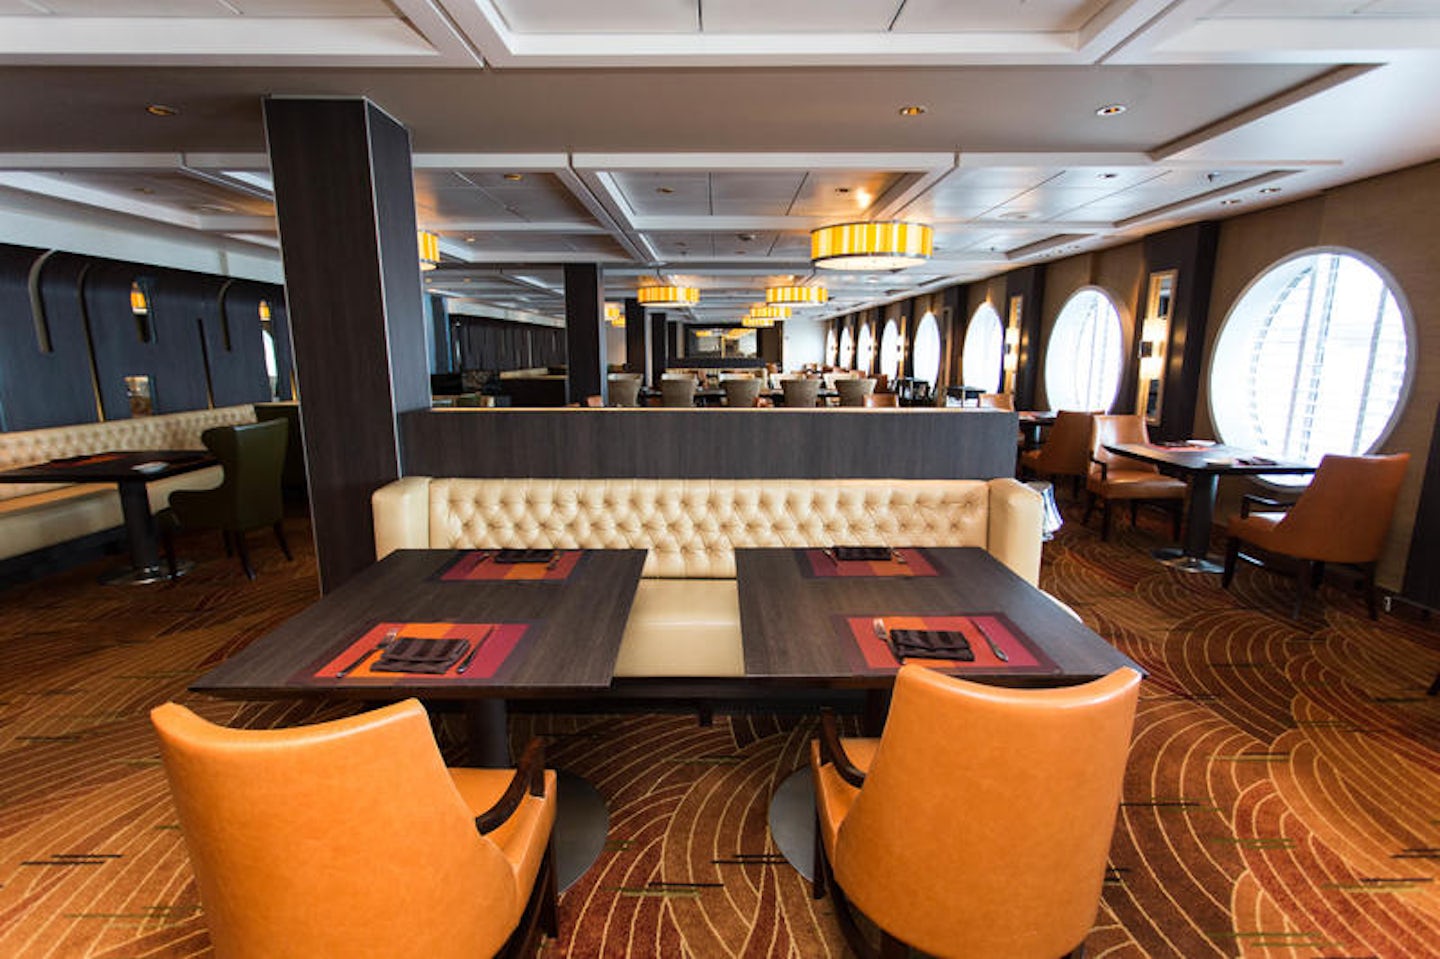 Tuscan Grill on Celebrity Infinity